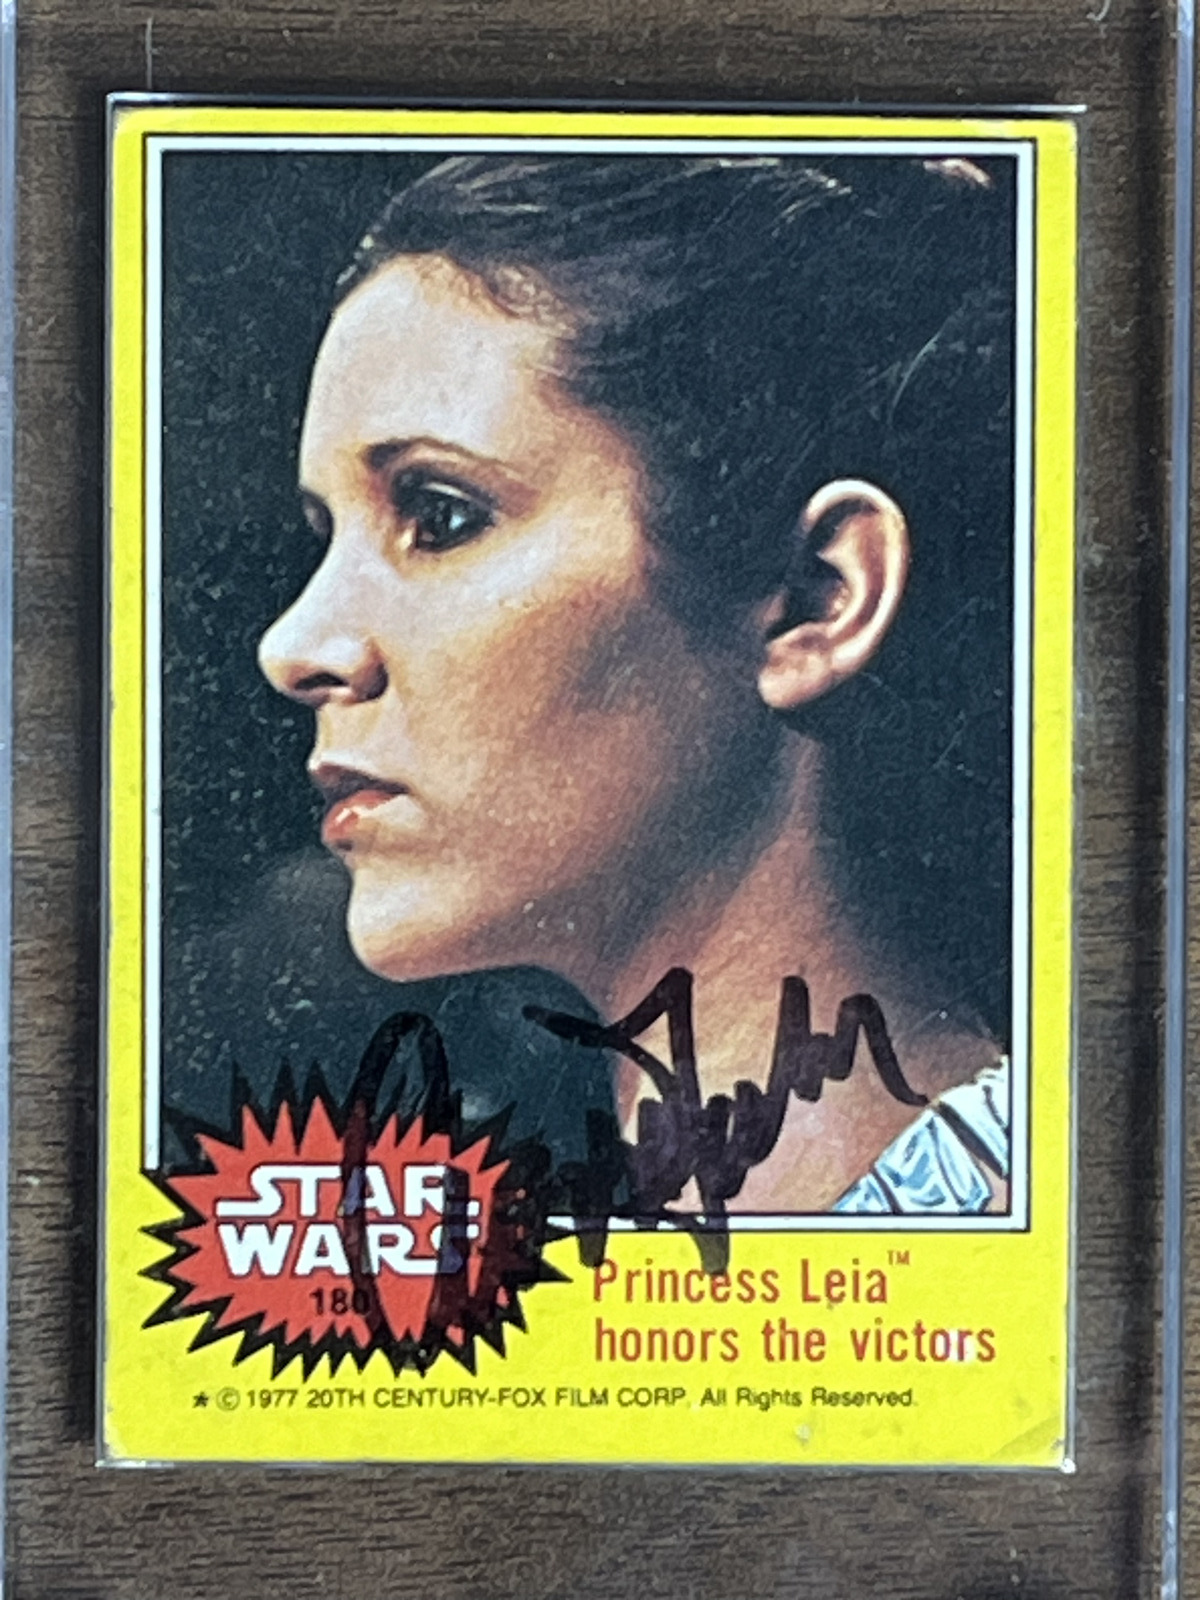 1977 Star Wars Topps Yellow Series #180 Carrie Fisher Princess Leia Autographed